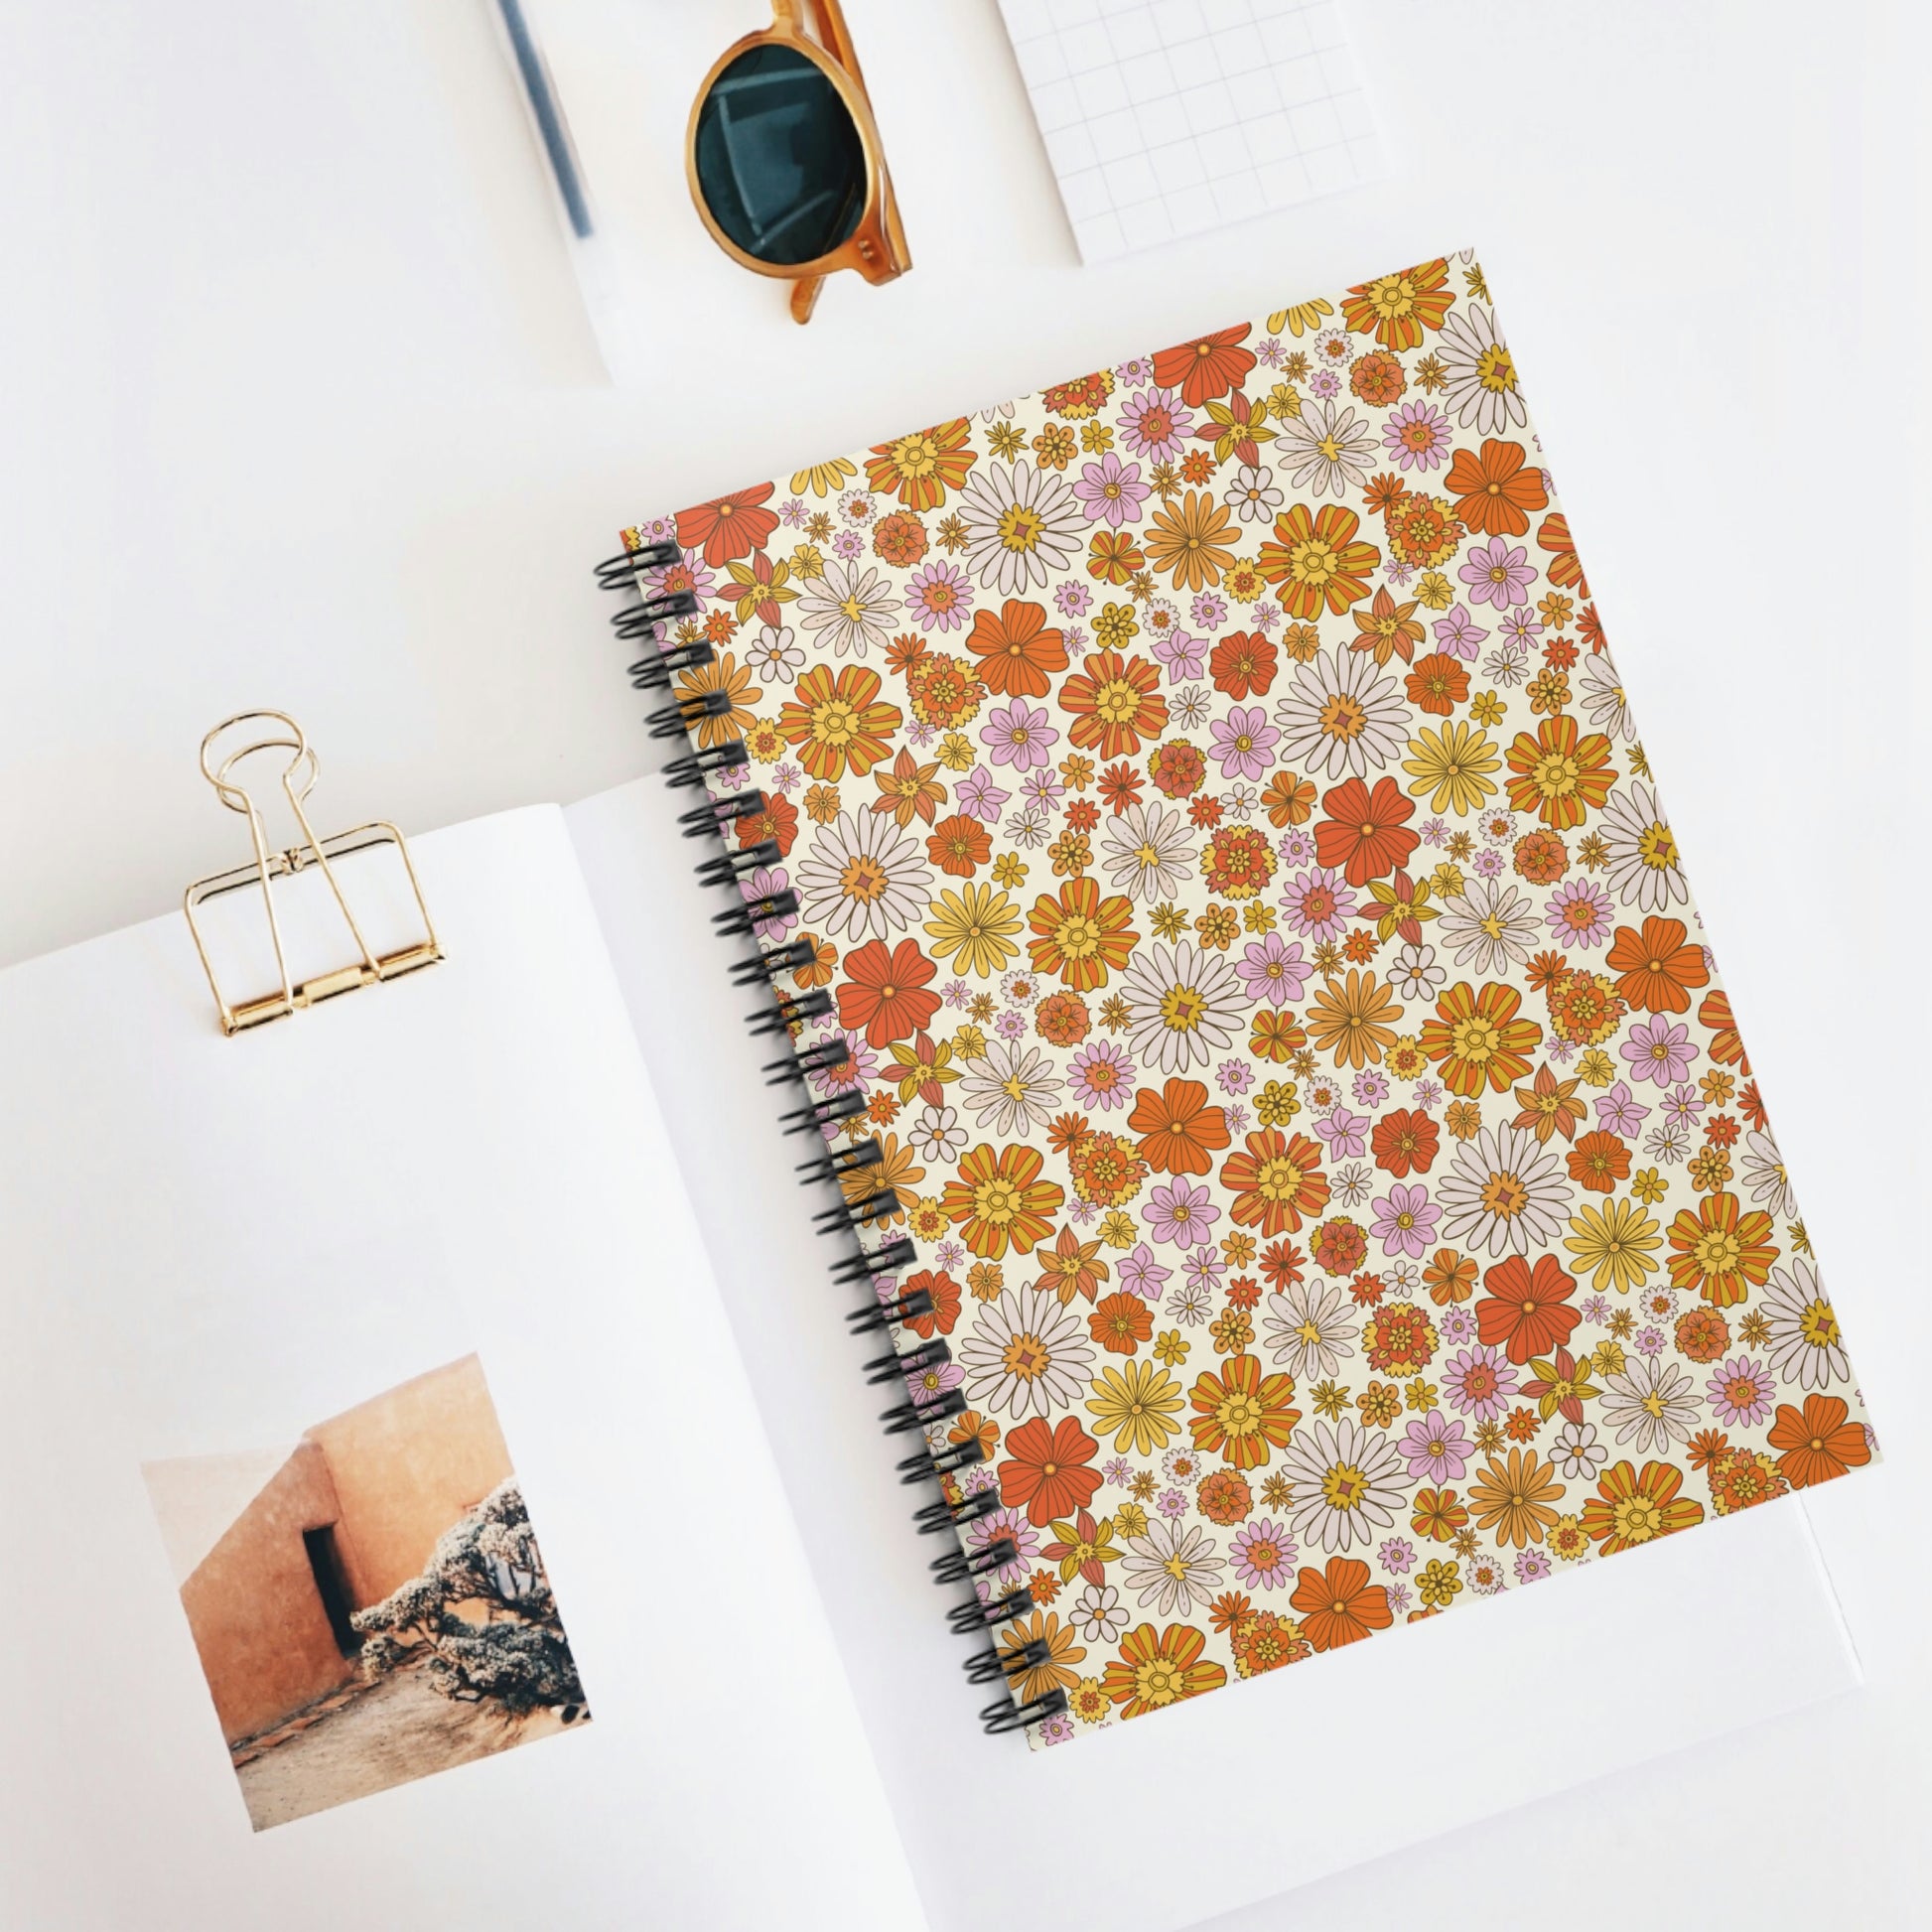 Floral Spiral Notebook, Groovy Flowers 70s Retro Cute Design Journal Traveler Notepad Ruled Line Book Paper Pad Small Aesthetic Starcove Fashion